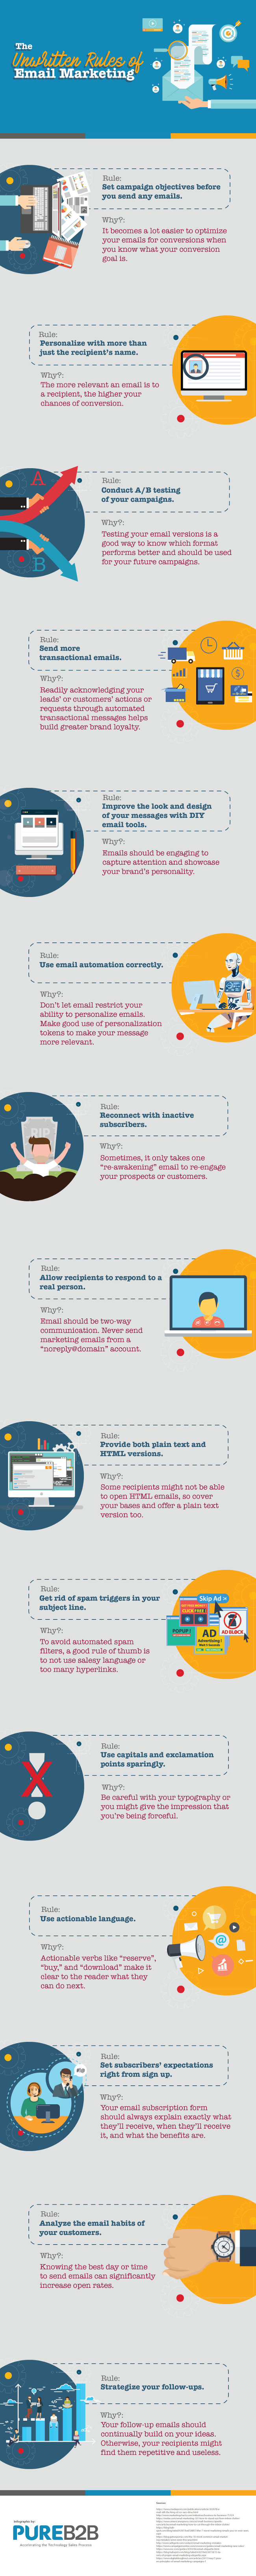 The Unwritten Rules of Email Marketing